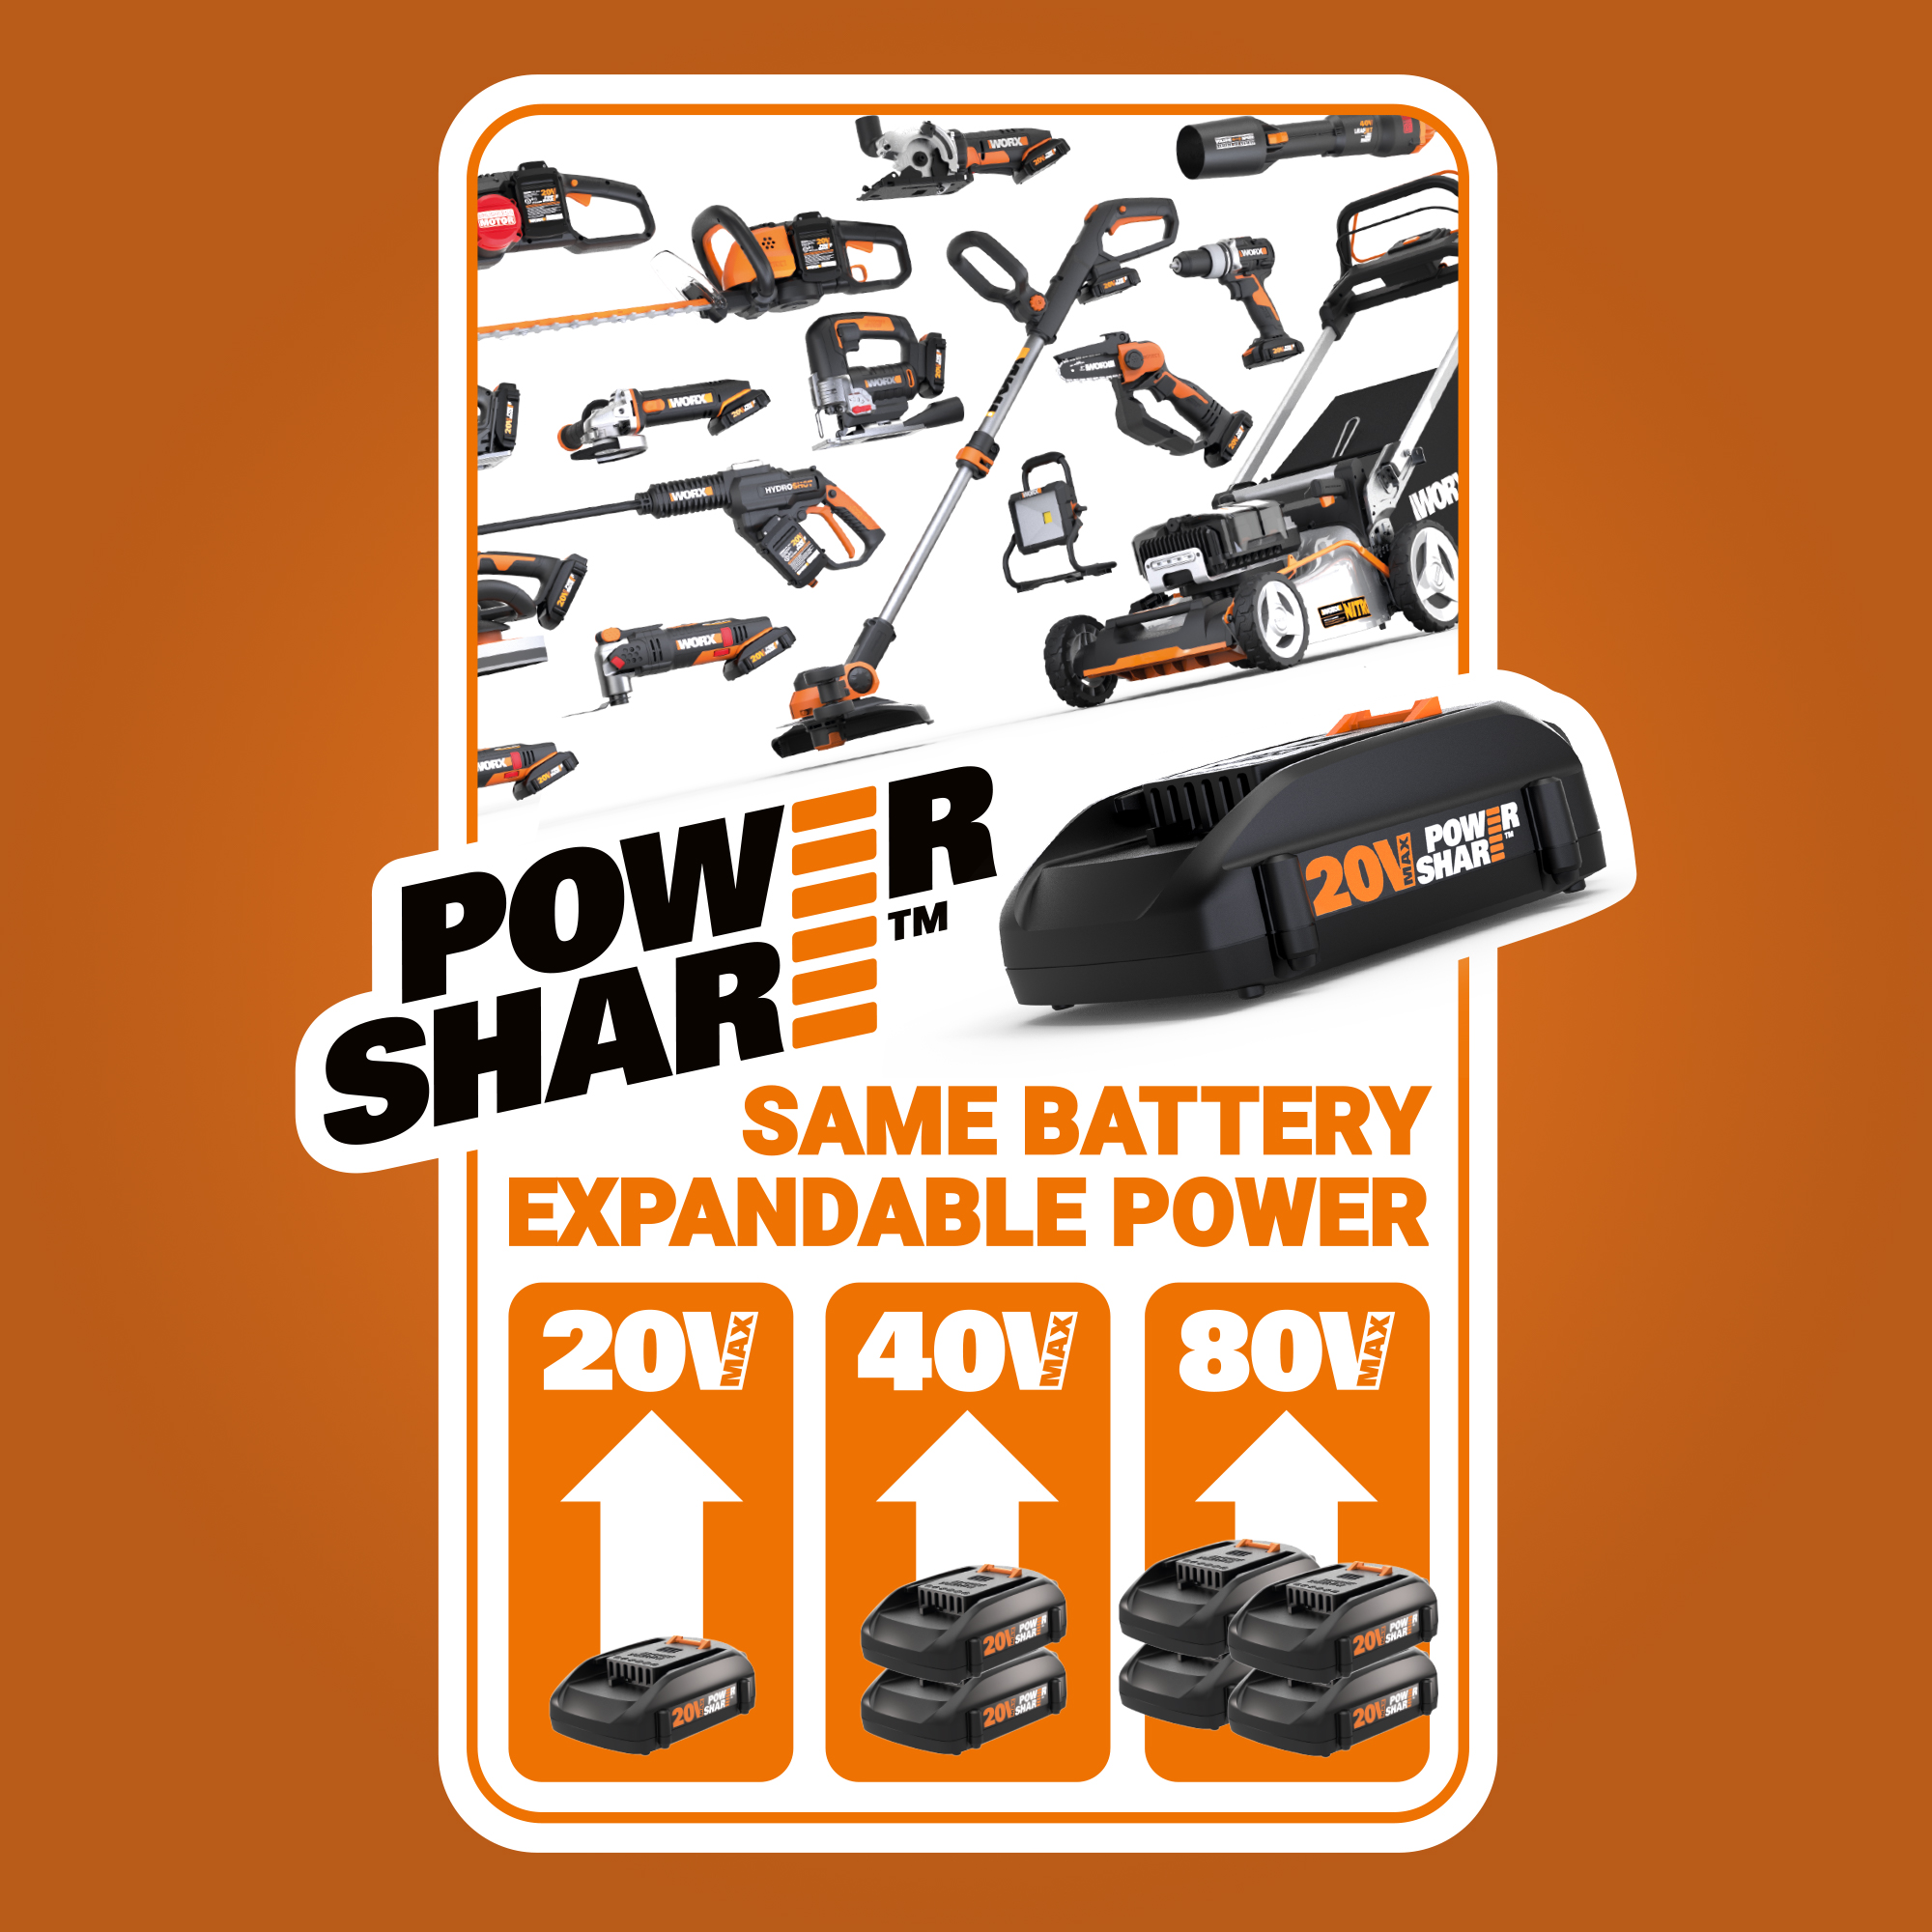 Worx WX550L.1 20V Power Share Axis Cordless Reciprocating  Jig Saw with  Orbital Mode, Variable Speed and Tool-Free Blade Change